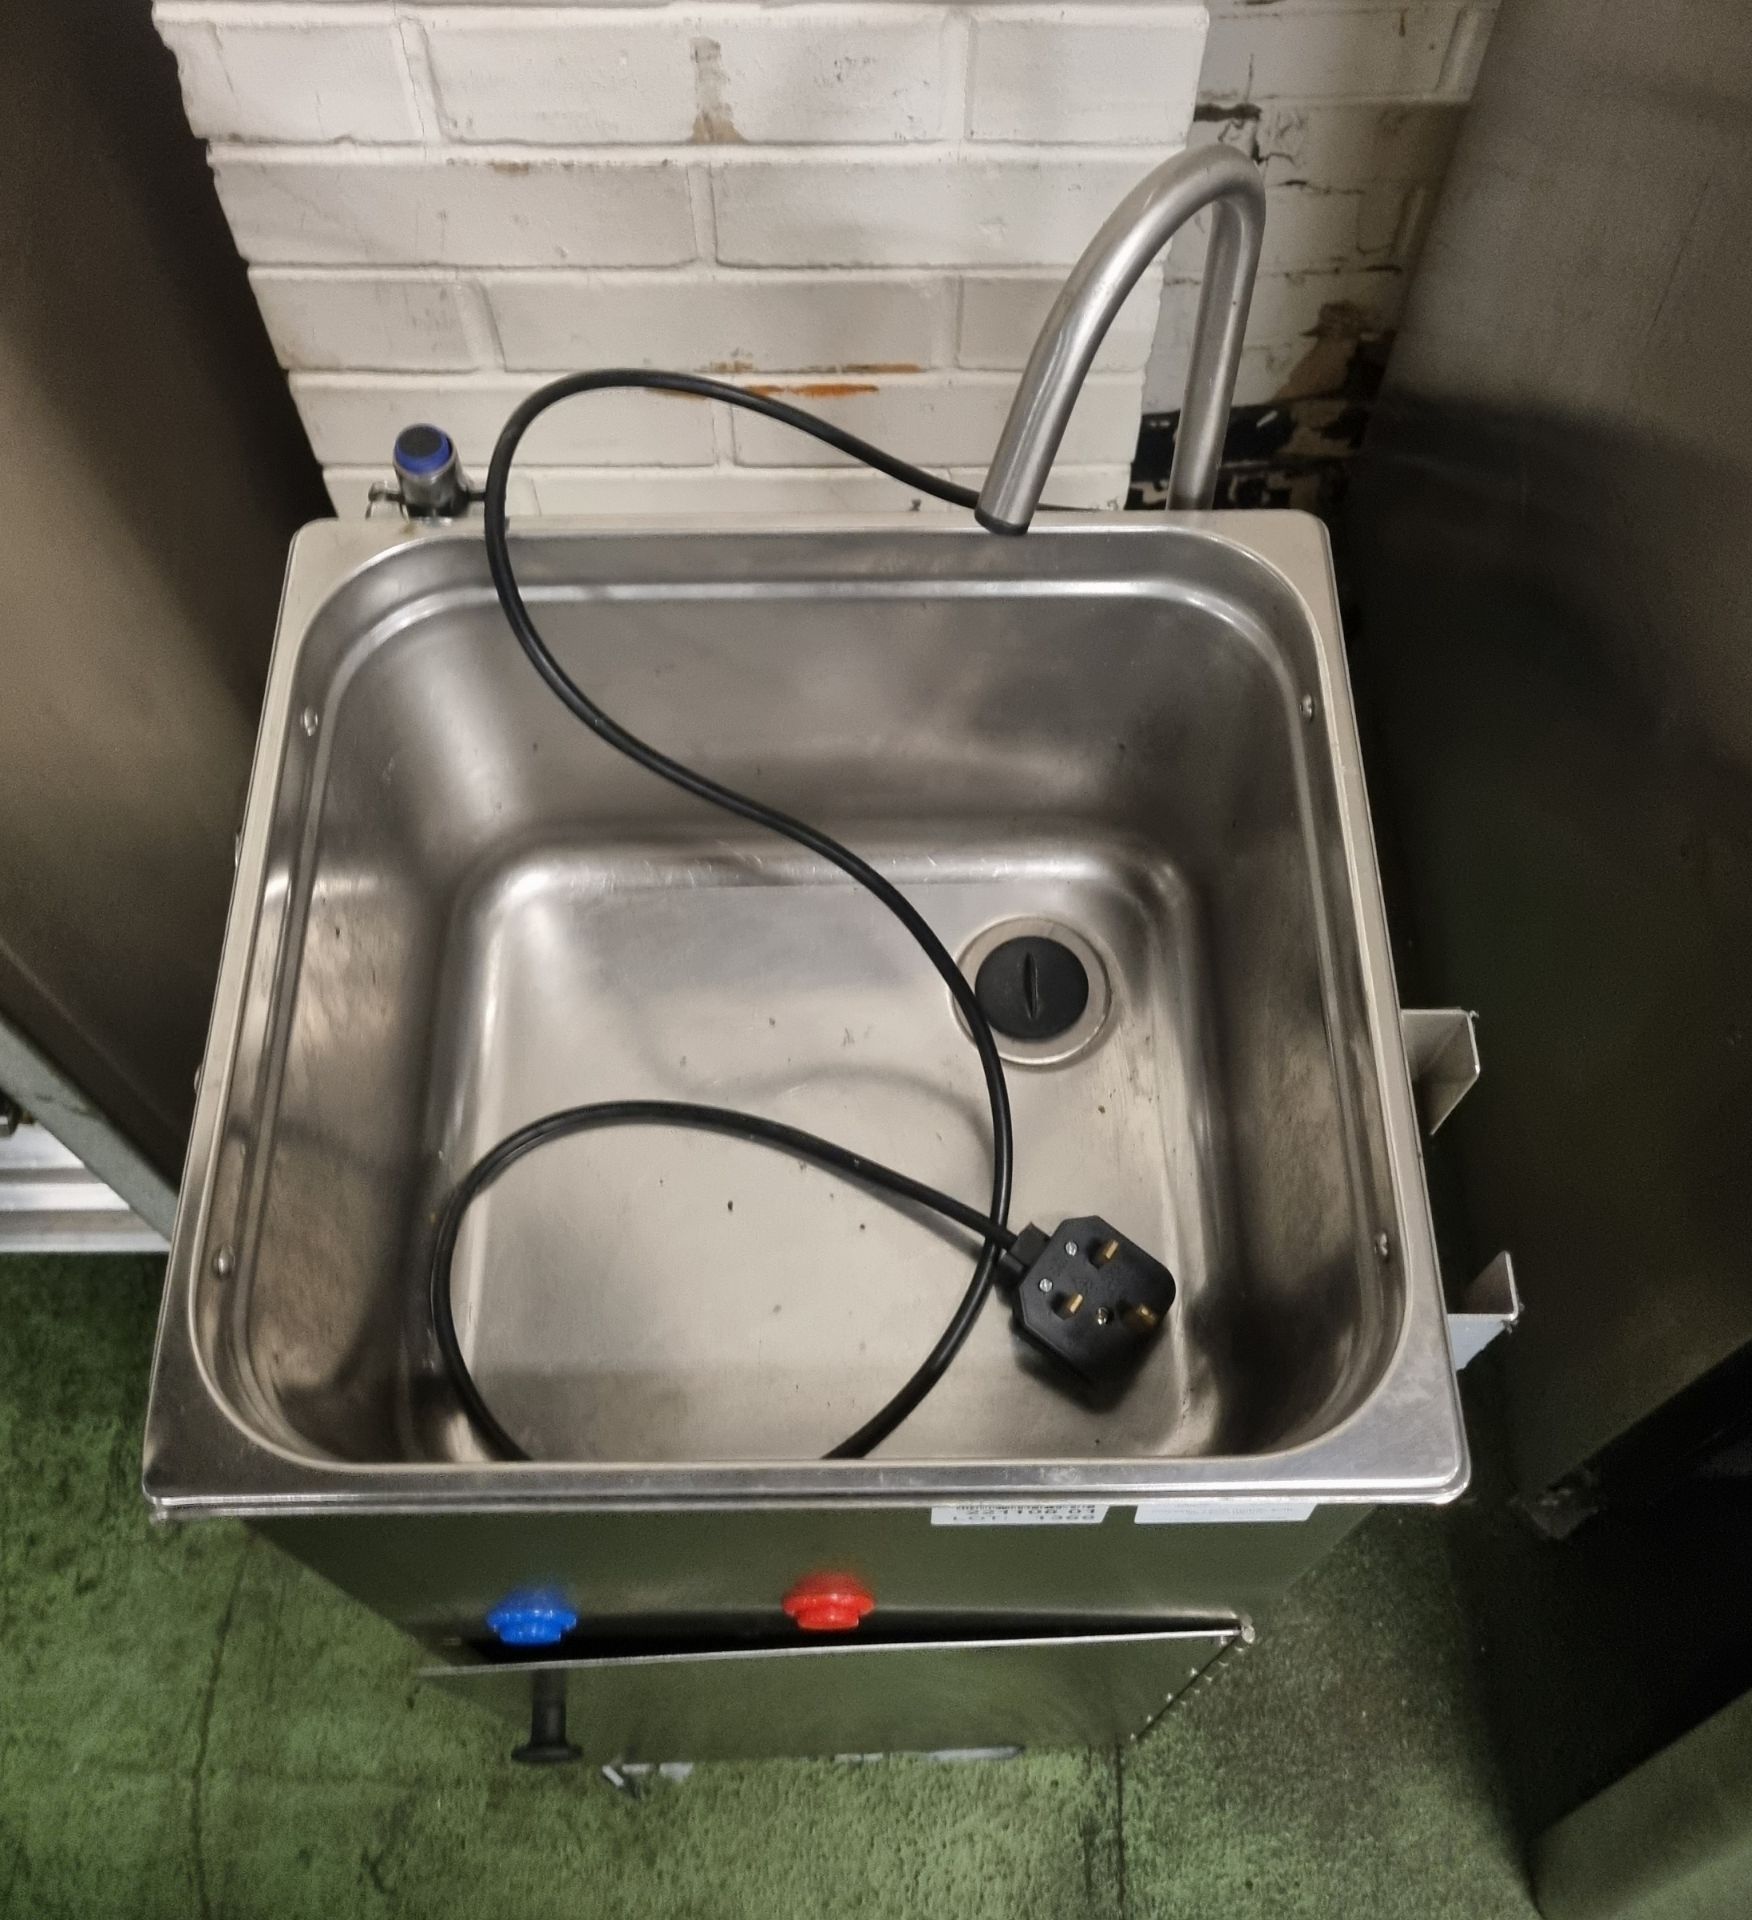 Odyssey 1500 mobile sink - 35x40x105cm - Image 2 of 6